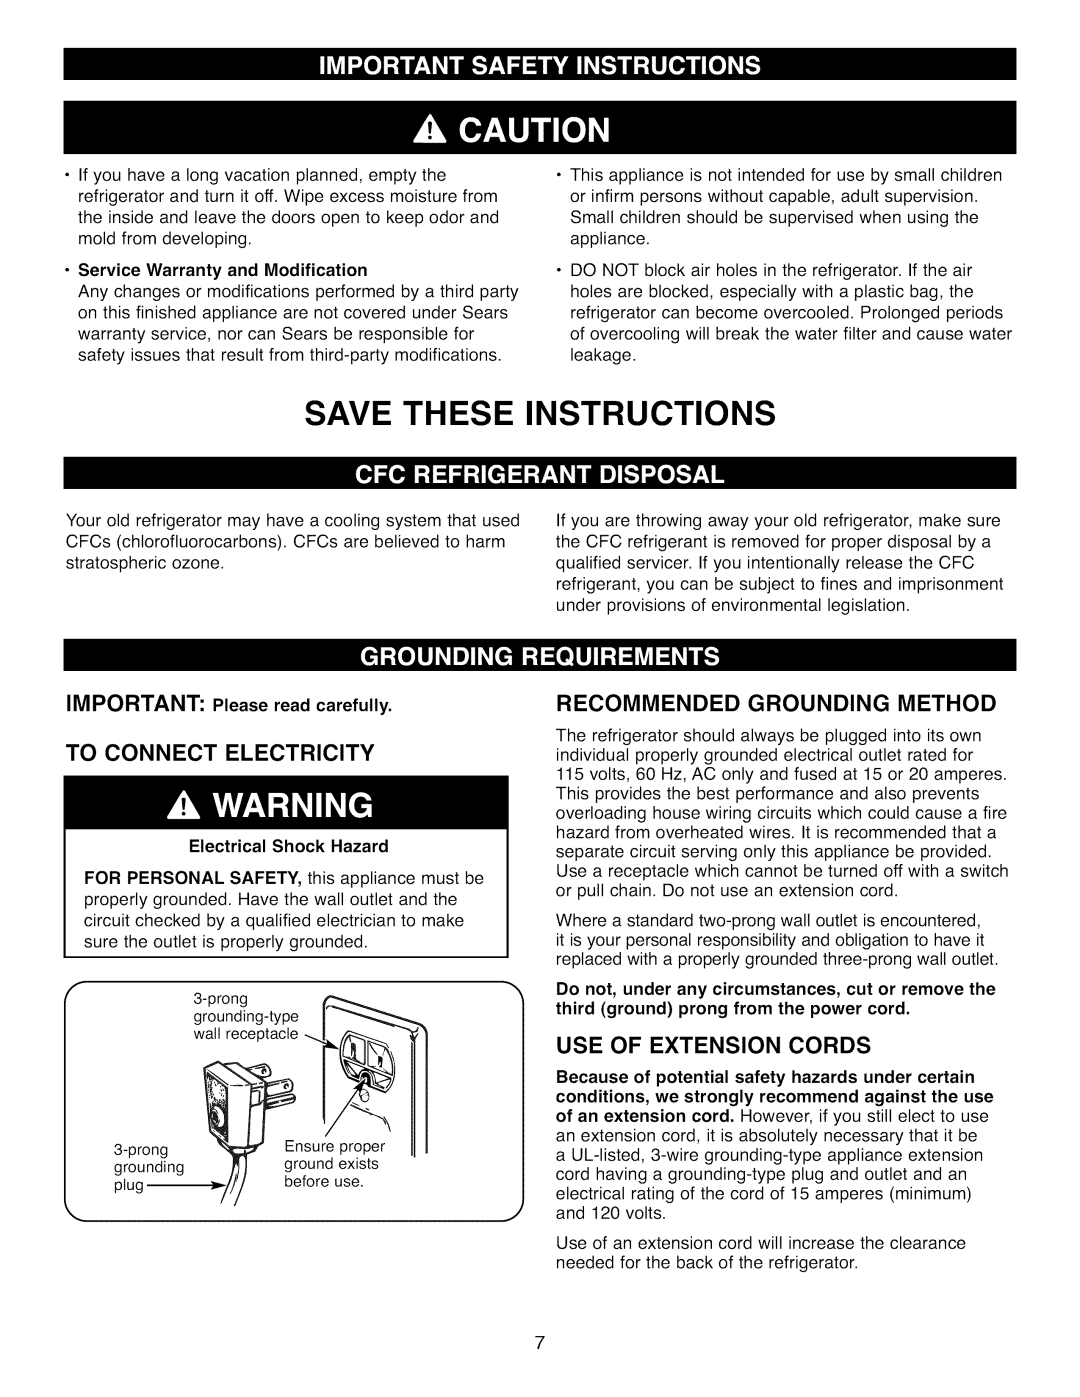 Kenmore 41002, 41003 To Connect Electricity, Recommended Grounding Method, Use Of Extension Cords, Save These Instructions 